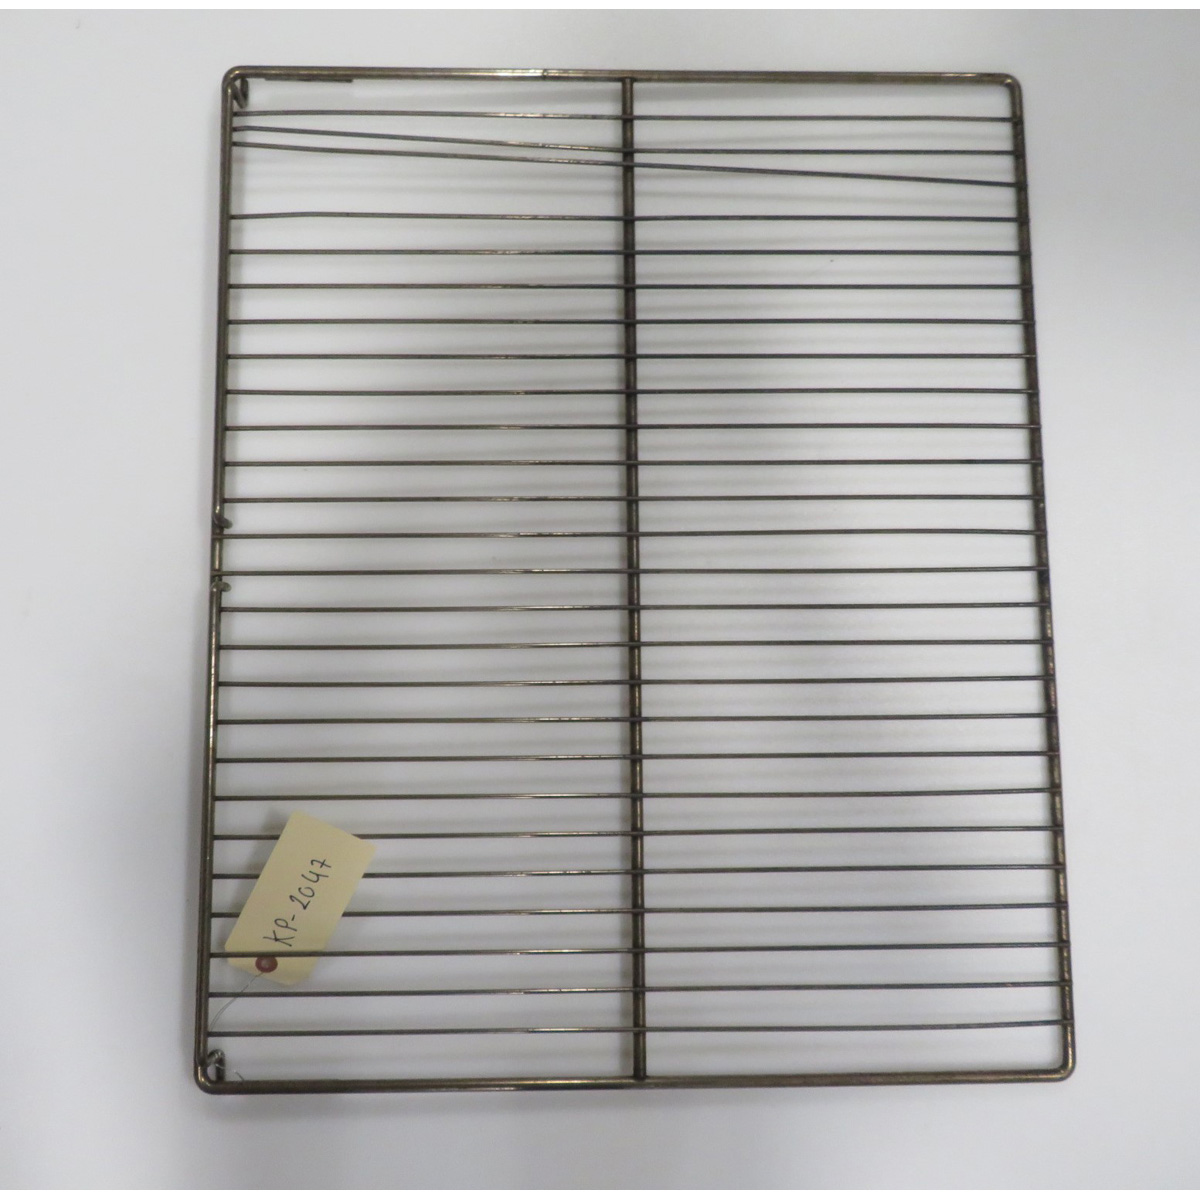 Duke 153230 Oven Rack, Standard, Used Excellent Condition